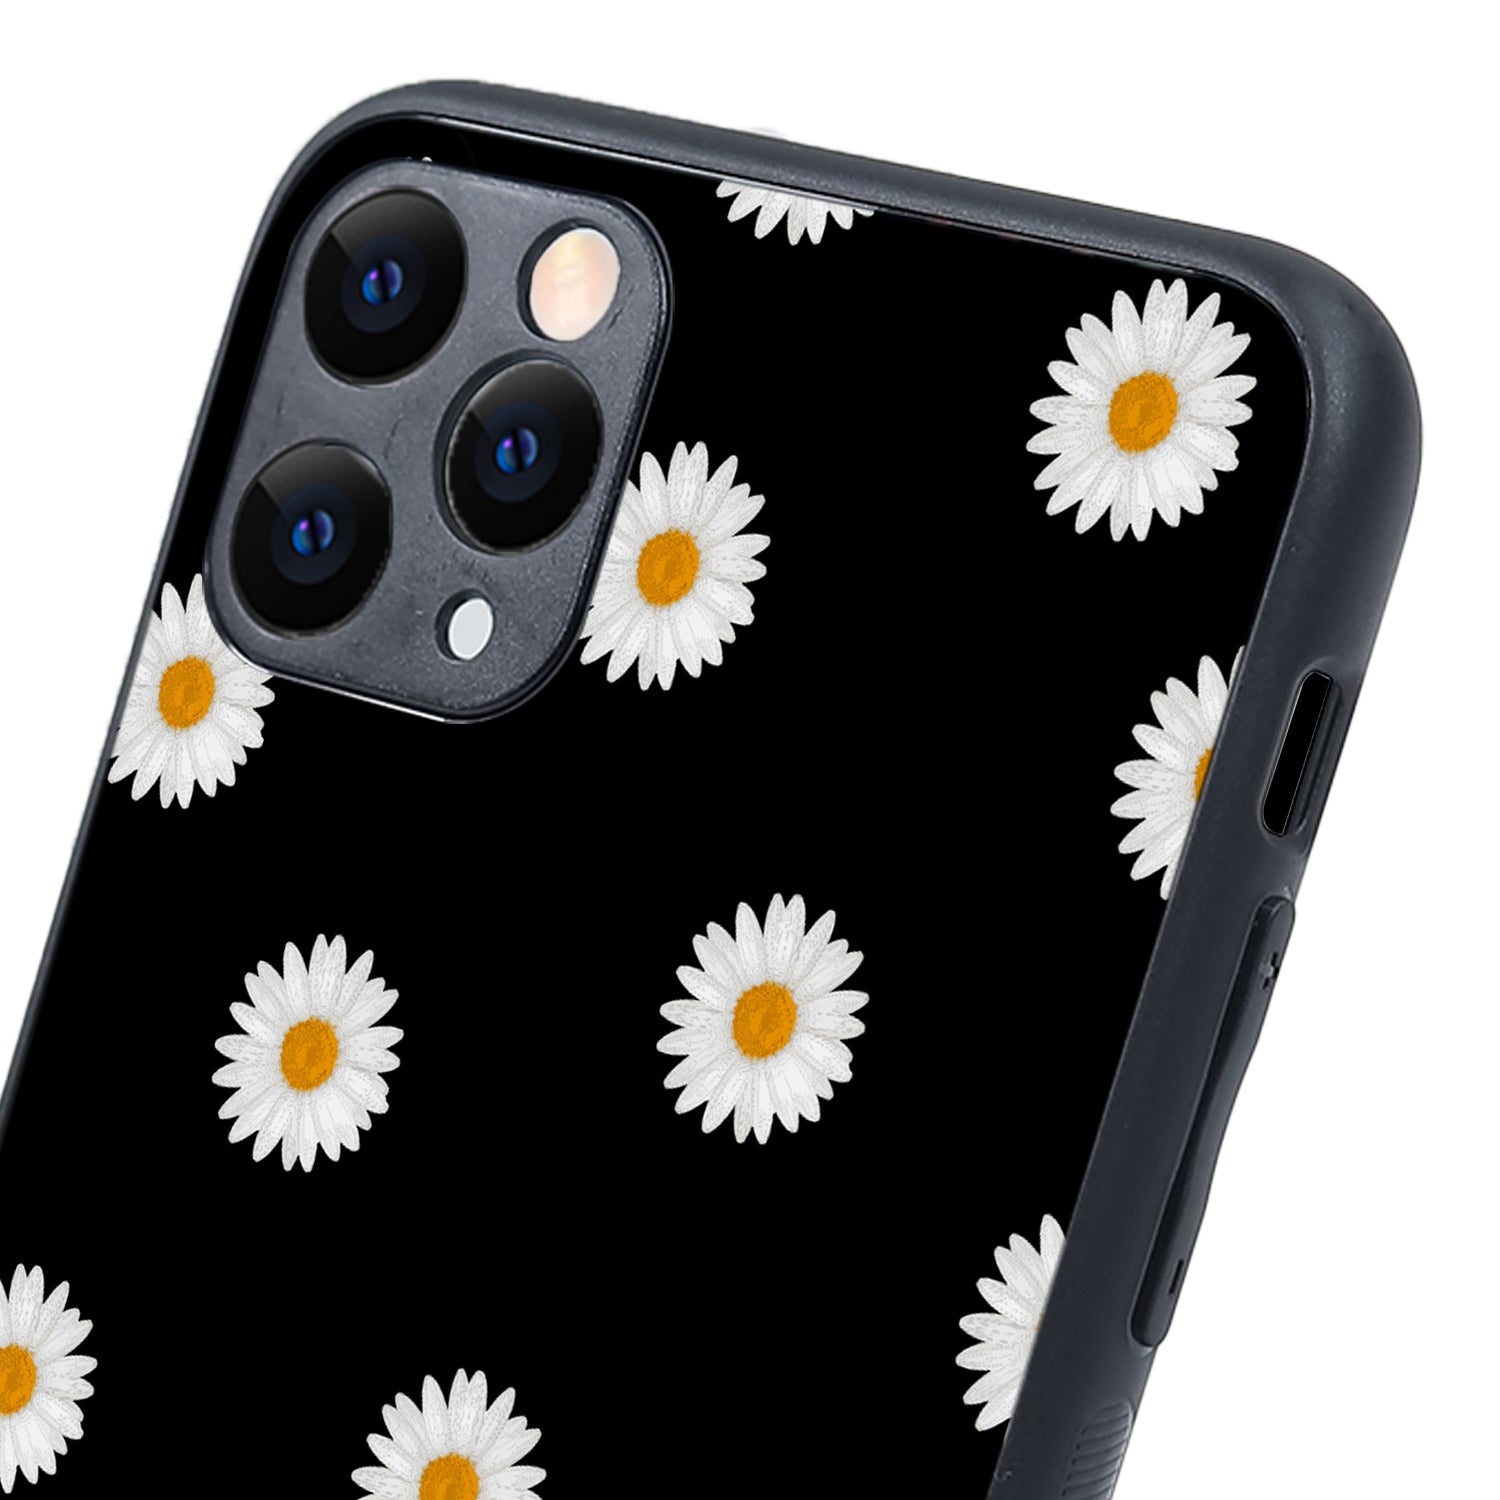 White Sunflower Floral iPhone 11 Pro Max Case